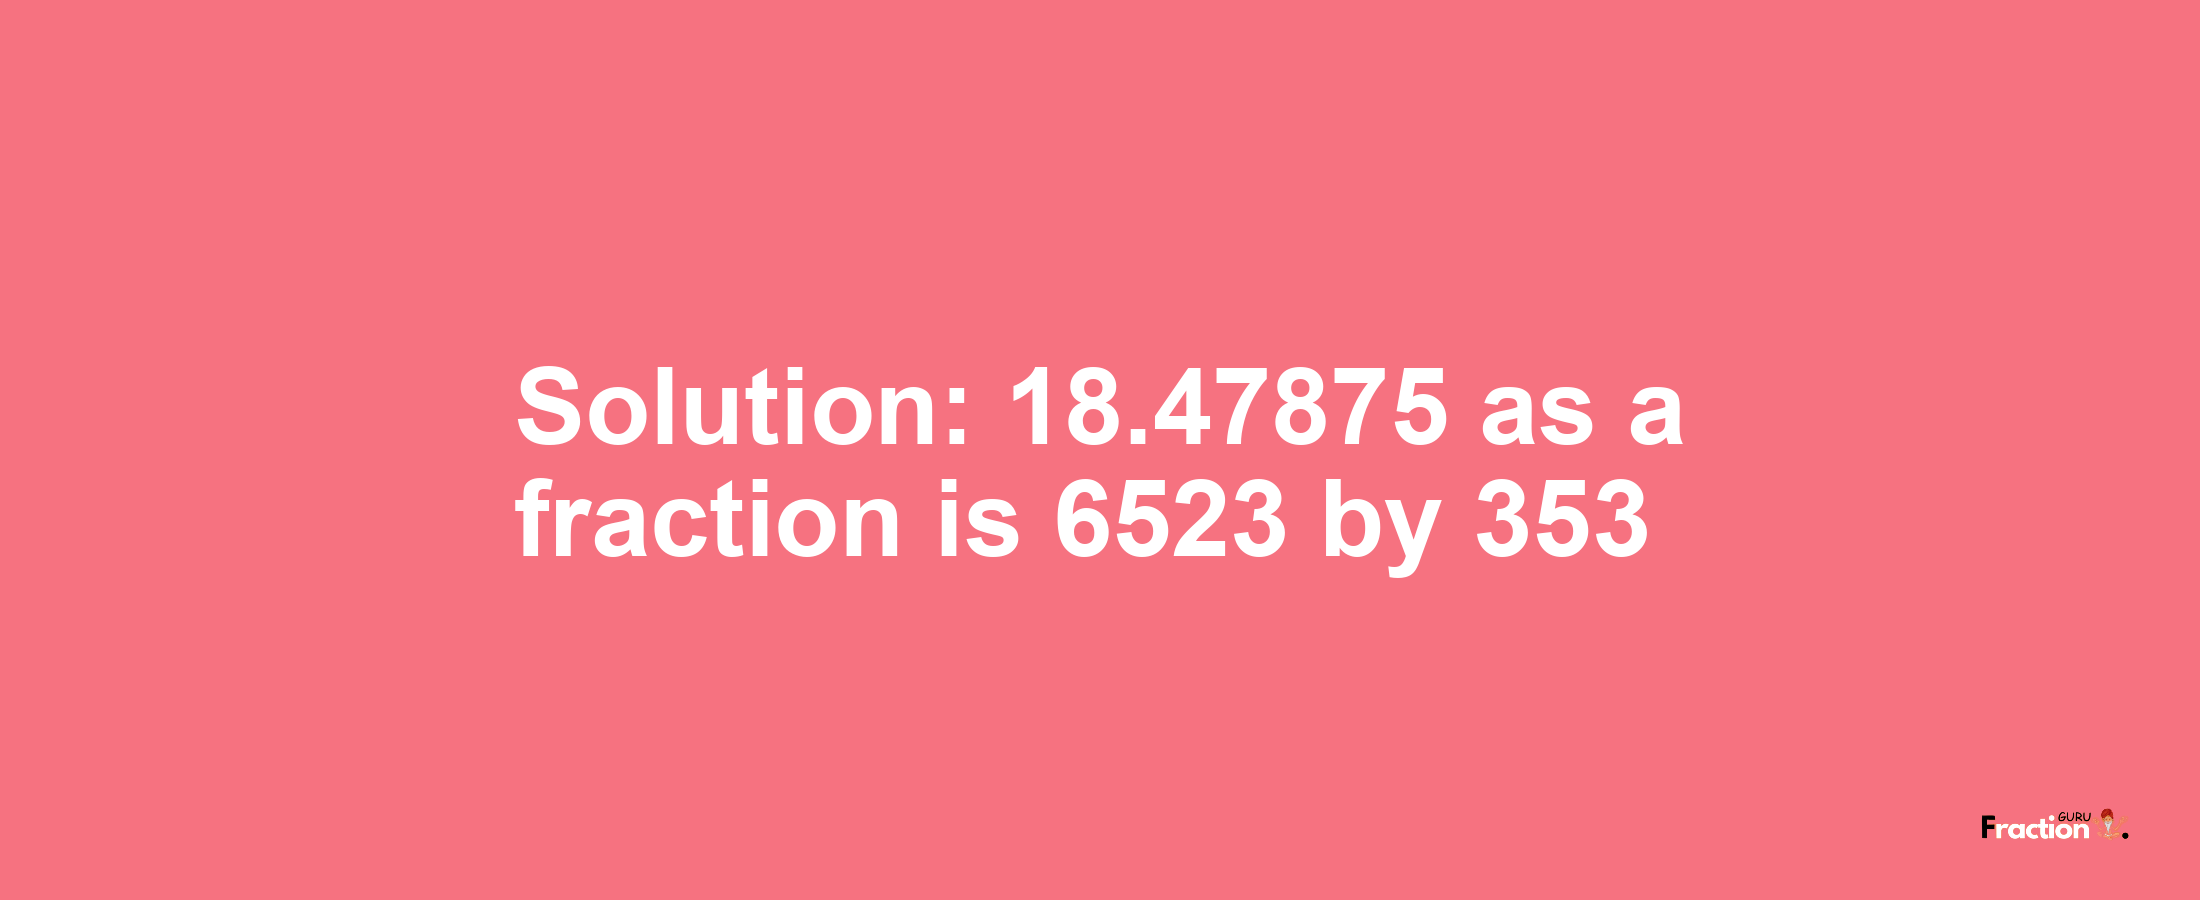 Solution:18.47875 as a fraction is 6523/353